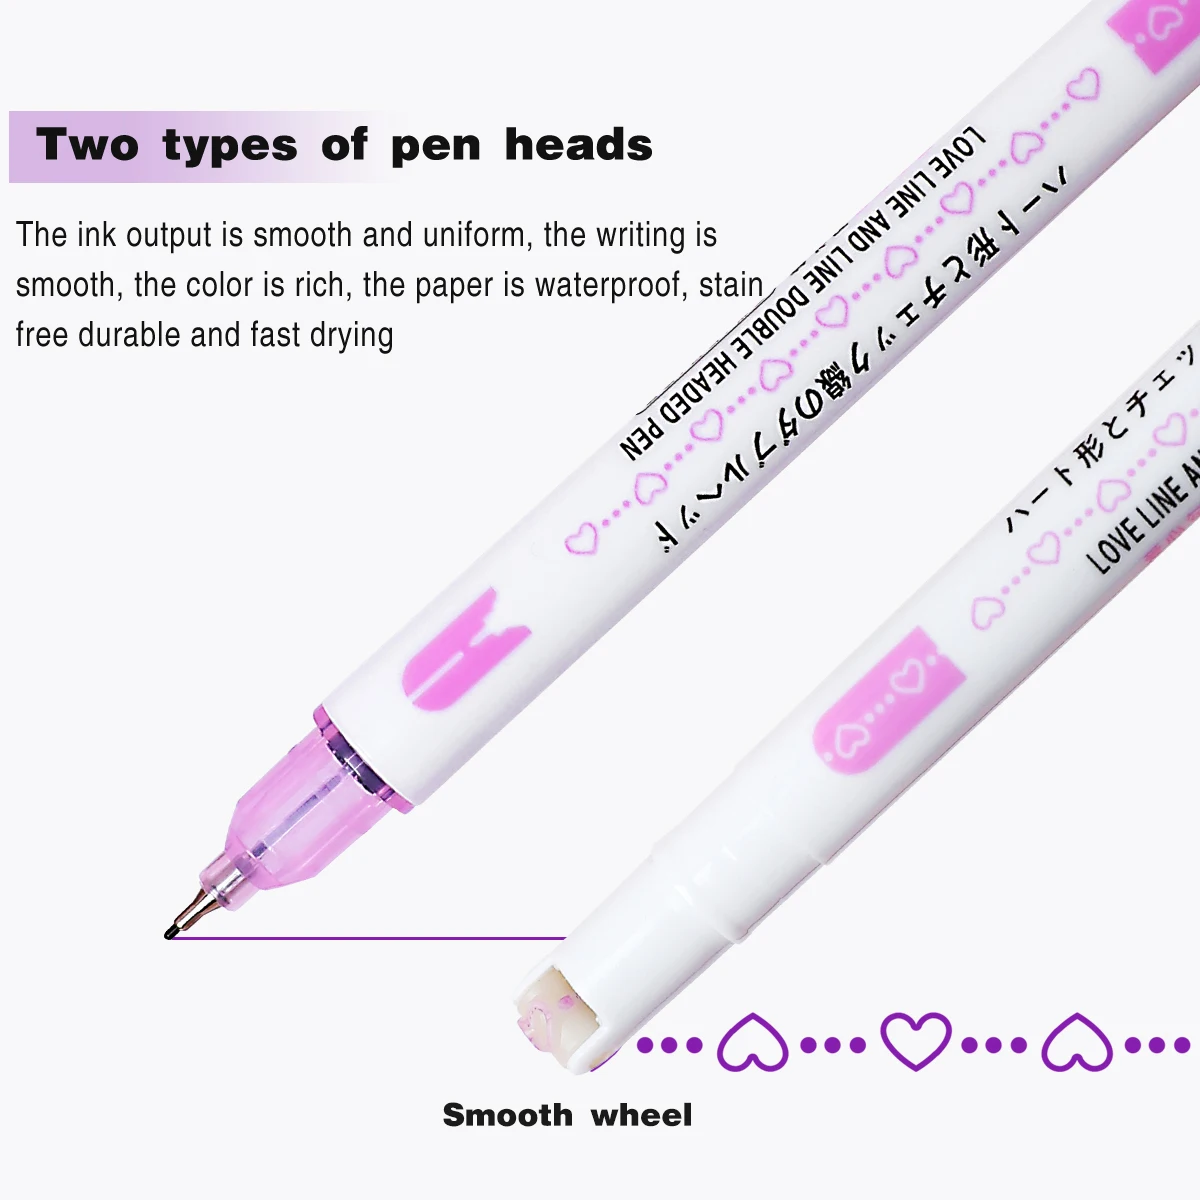 Curva Pen - Curva Pen molds to your writing style